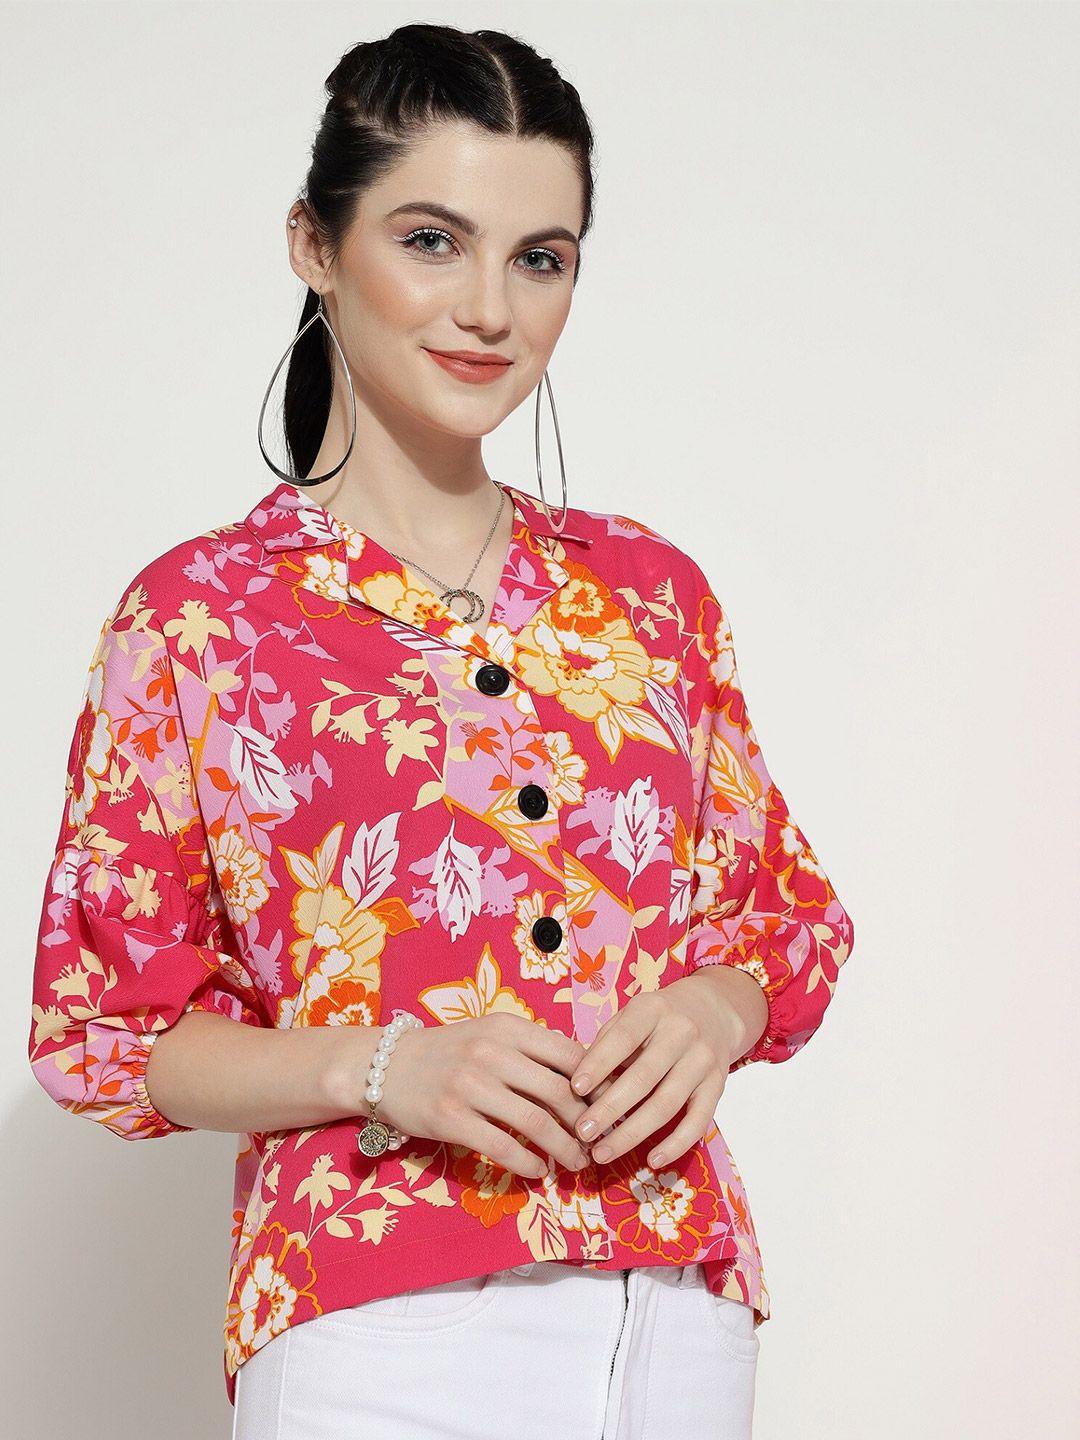 clemira floral printed cuban collar cuffed sleeves shirt style top